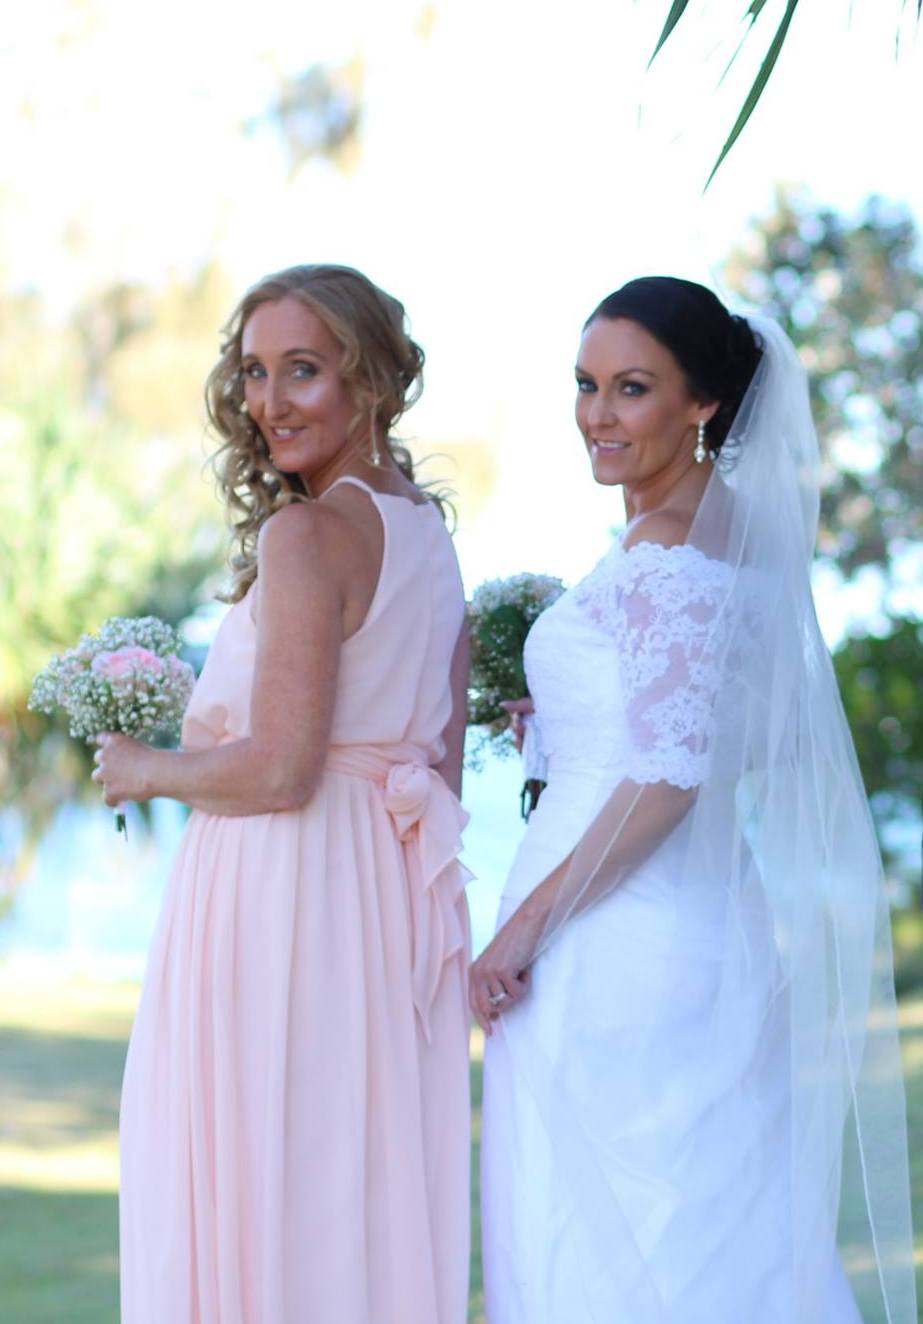 bride in white with her sister bridesmaid in pink with pink posy looking back